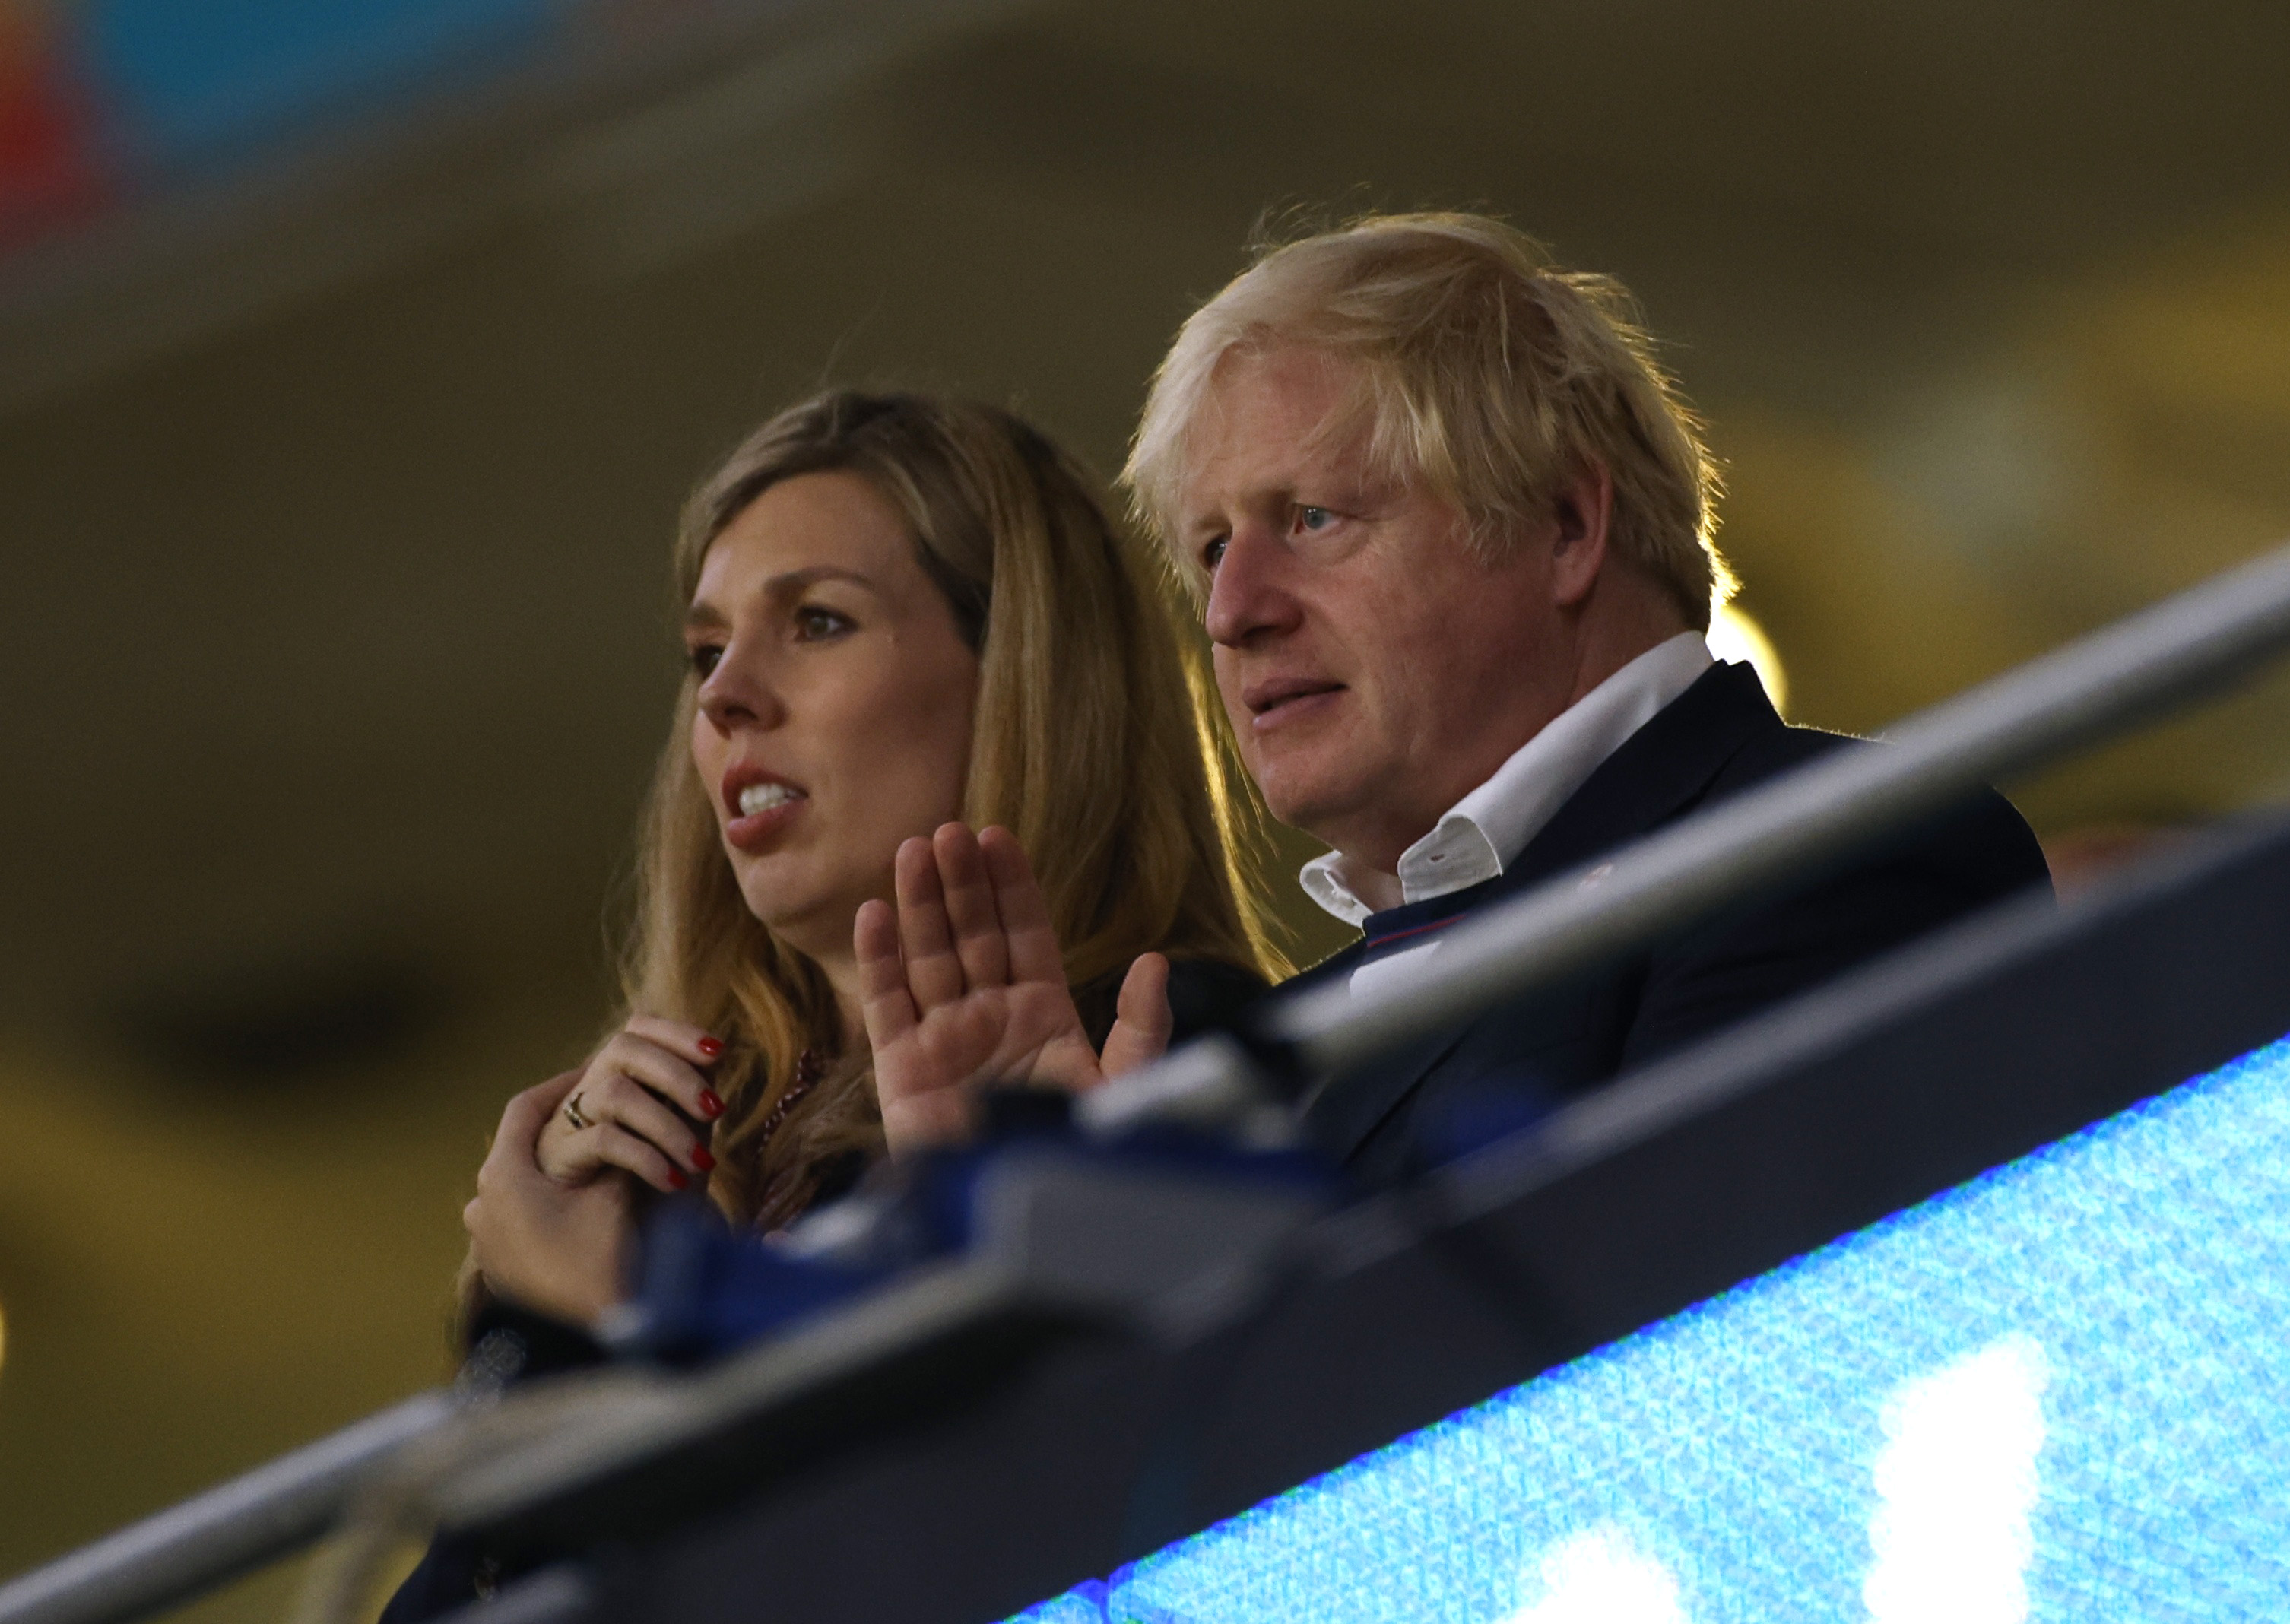 Soccer Football - Euro 2020 - Final - Italy v England - Wembley Stadium, London, Britain - July 11, 2021 Britain's Prime Minister Boris Johnson with his wife Carrie Johnson after the match Pool via REUTERS/John Sibley